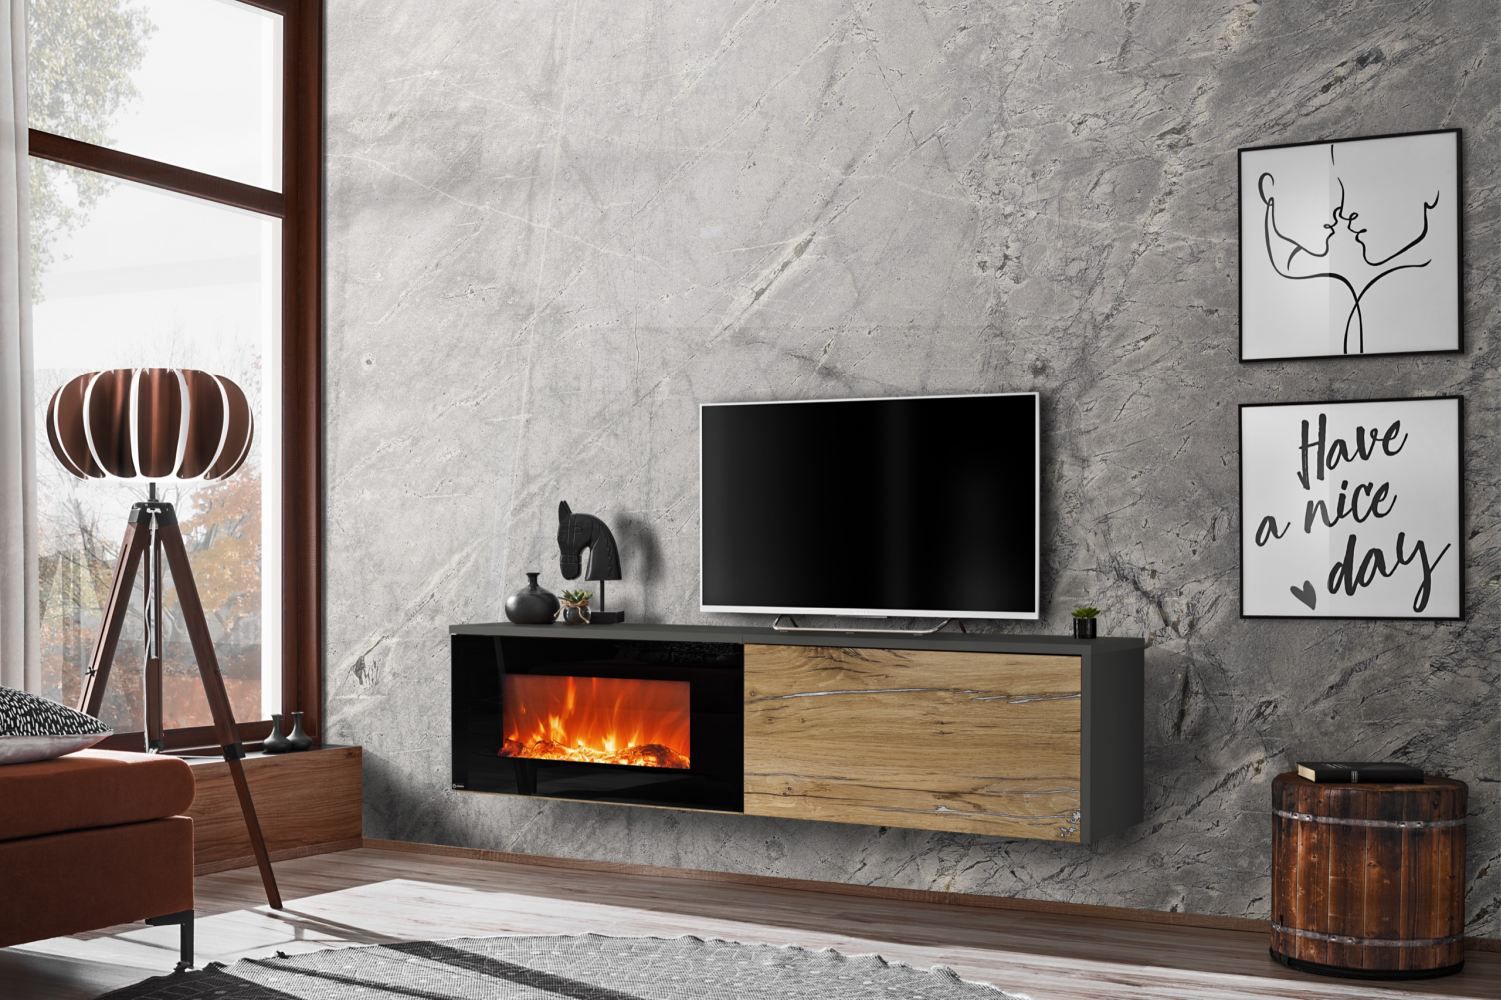 TV cabinet in modern style Bjordal 20, color: oak Flagstaff / anthracite - dimensions: 45 x 180 x 40 cm (H x W x D), with electric fireplace